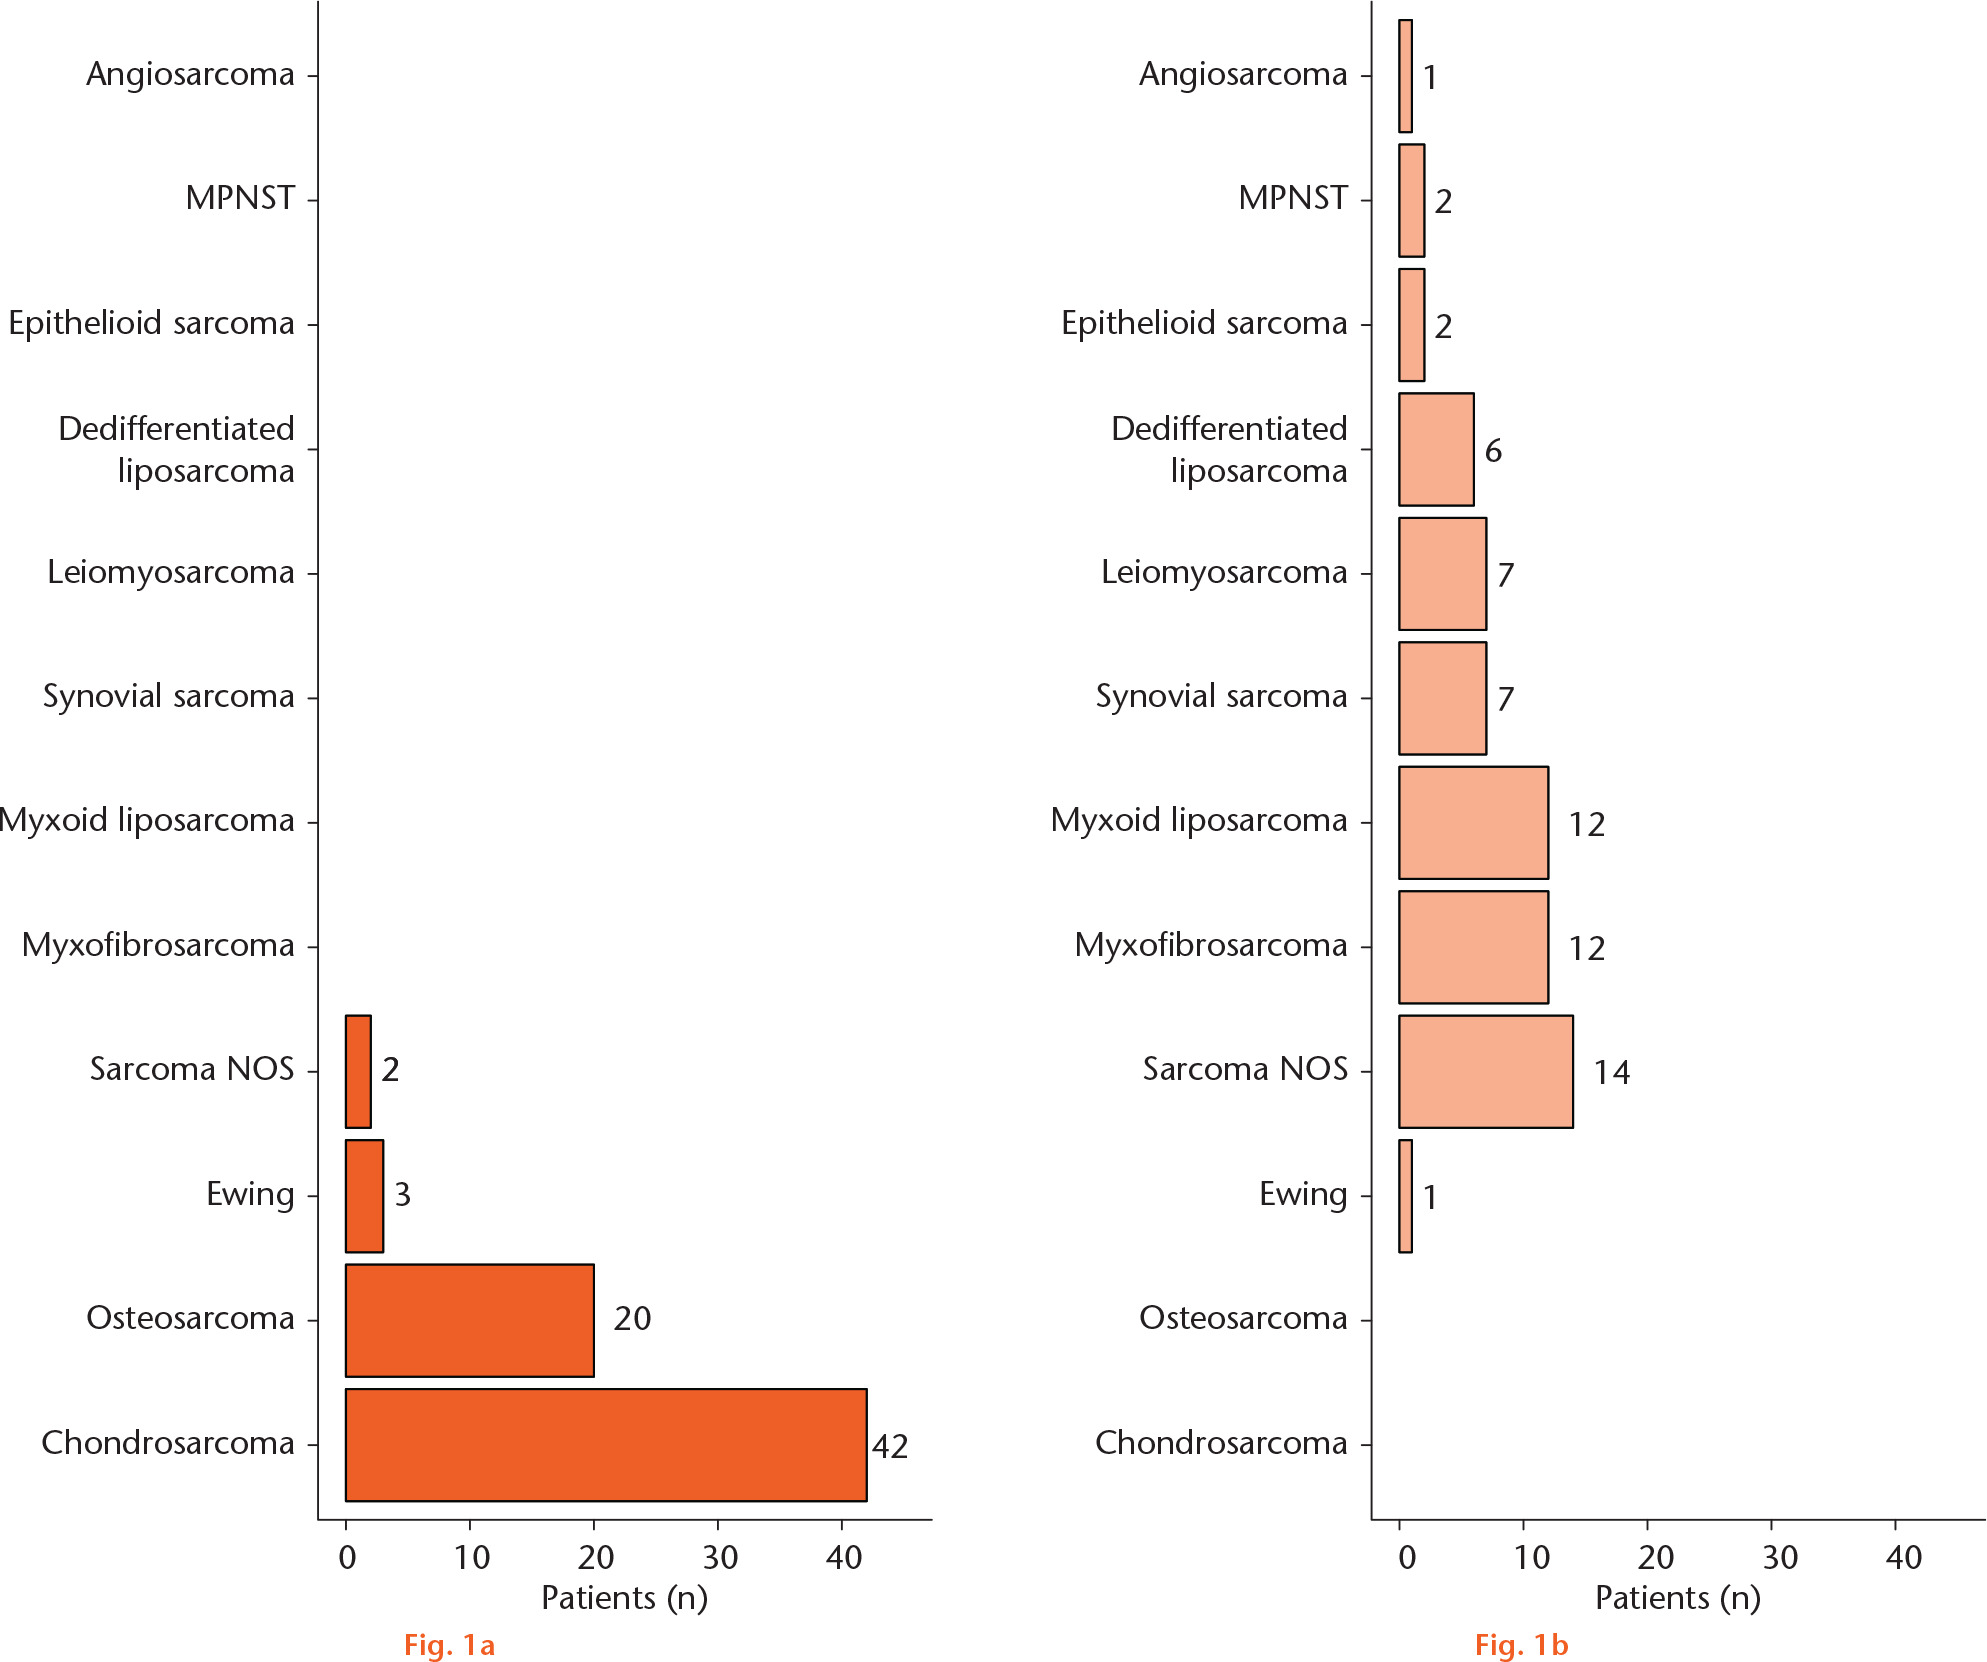  
            Graph showing diagnoses of 131 surveillance patients with a) high-grade bone and b) soft-tissue sarcomas (MPNST, malignant peripheral nerve sheath tumour; NOS, not otherwise specified).
          